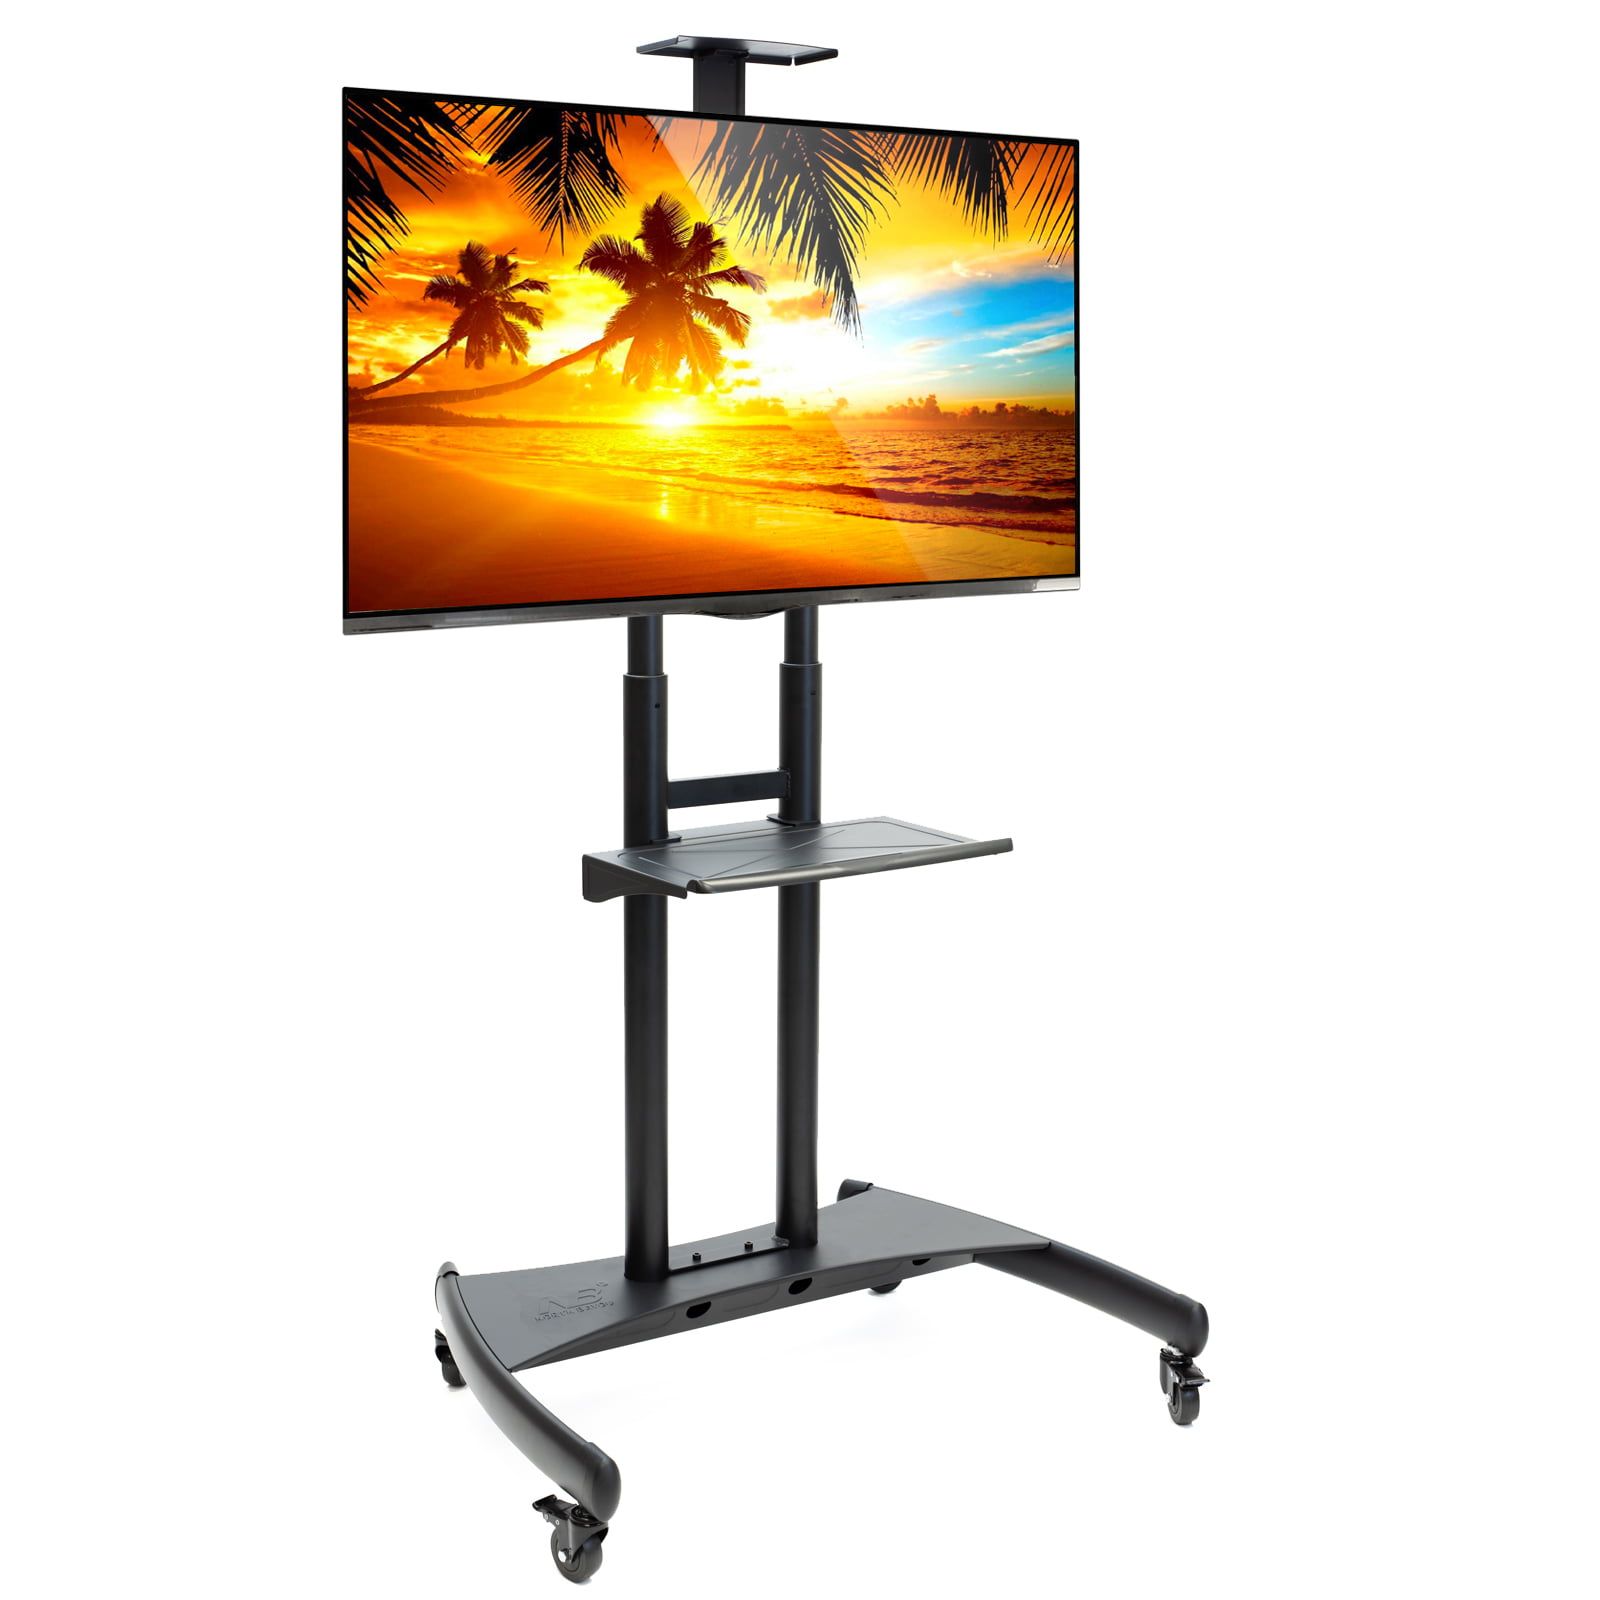 Rolling Tv Stand Mobile Tv Cart For 55" – 80" Plasma Screen, Led, Lcd Intended For Mobile Tilt Rolling Tv Stands (Gallery 1 of 20)